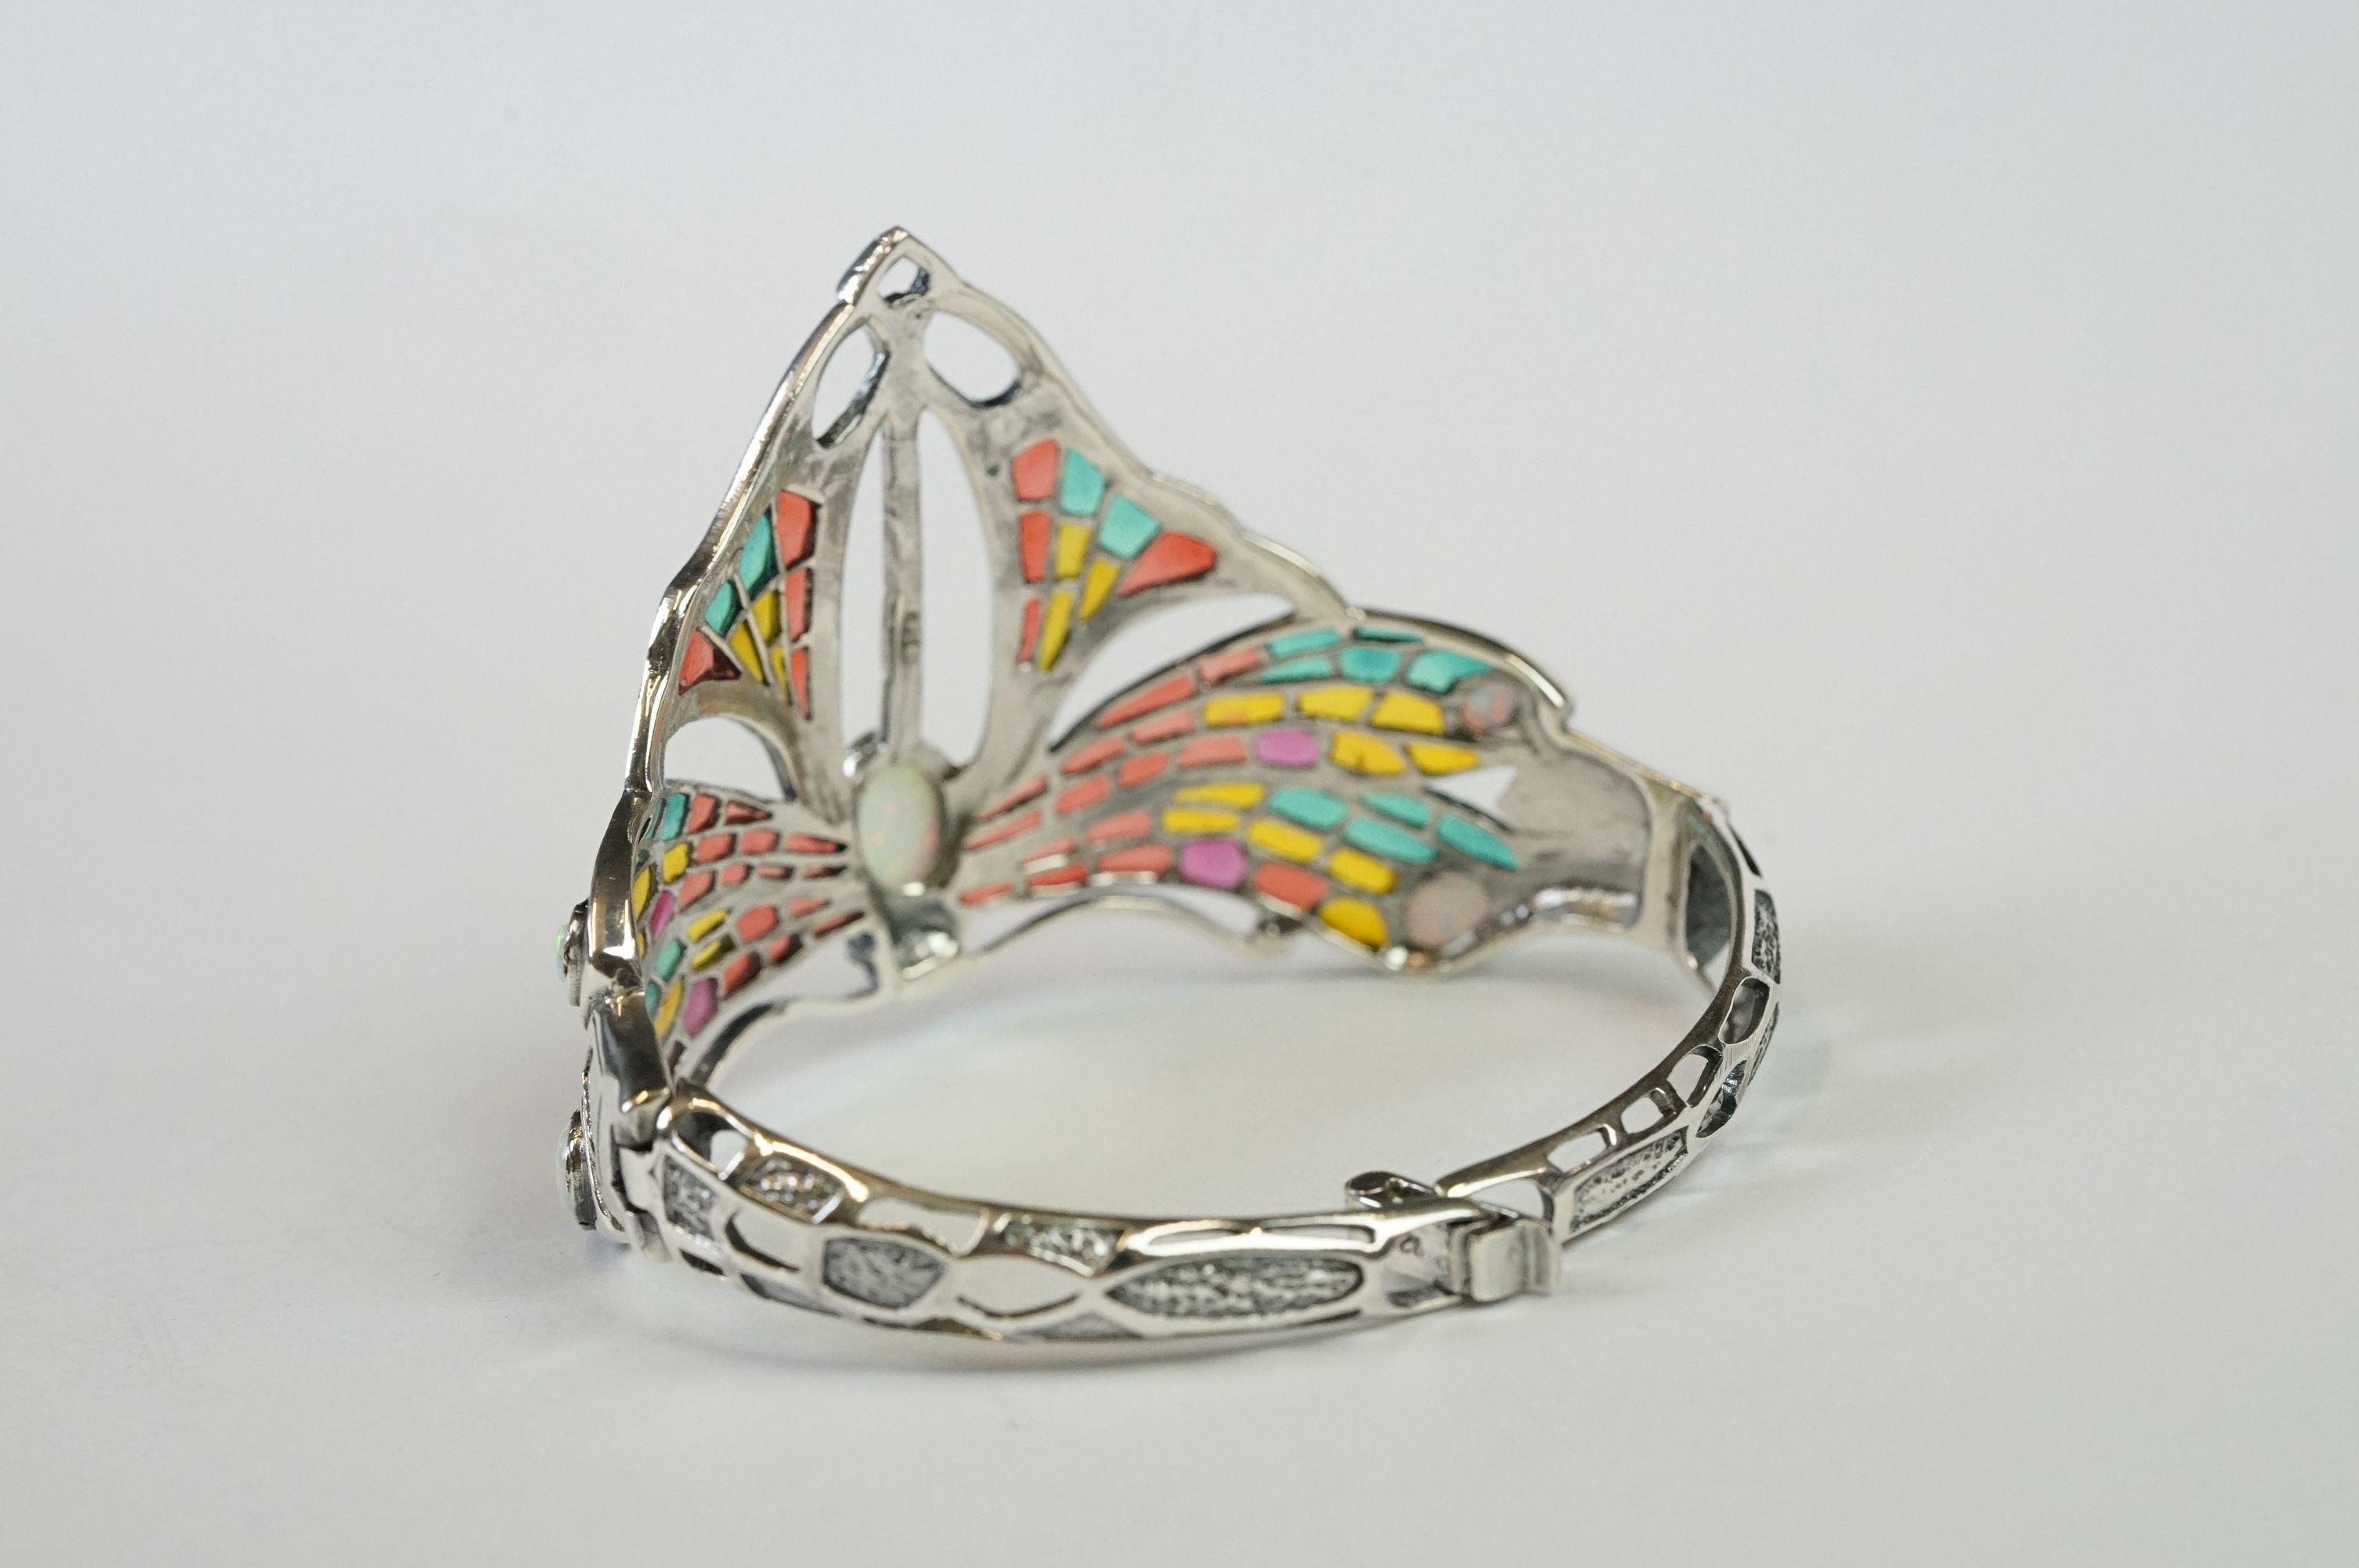 Large Silver Plique a Jour Cuff Bangle in the Art Deco style with opal cabochons - Image 5 of 11